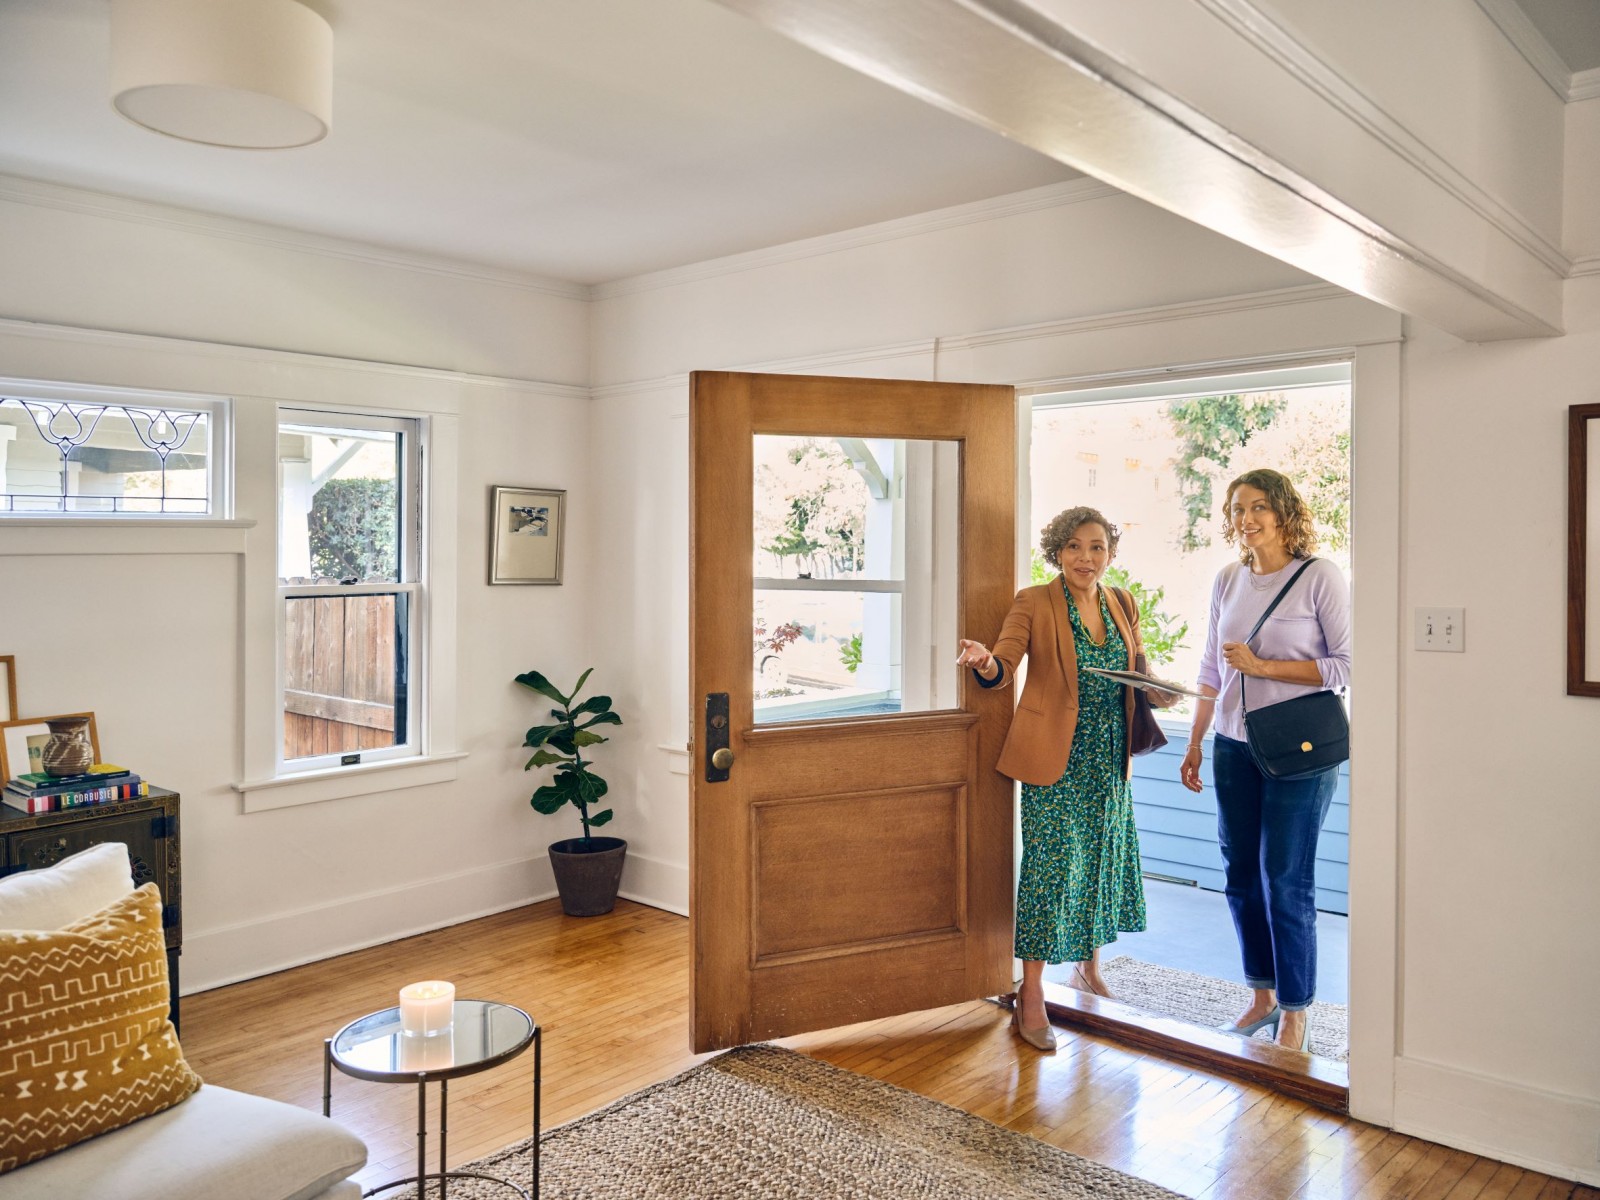 What to Look for When Buying Your First House